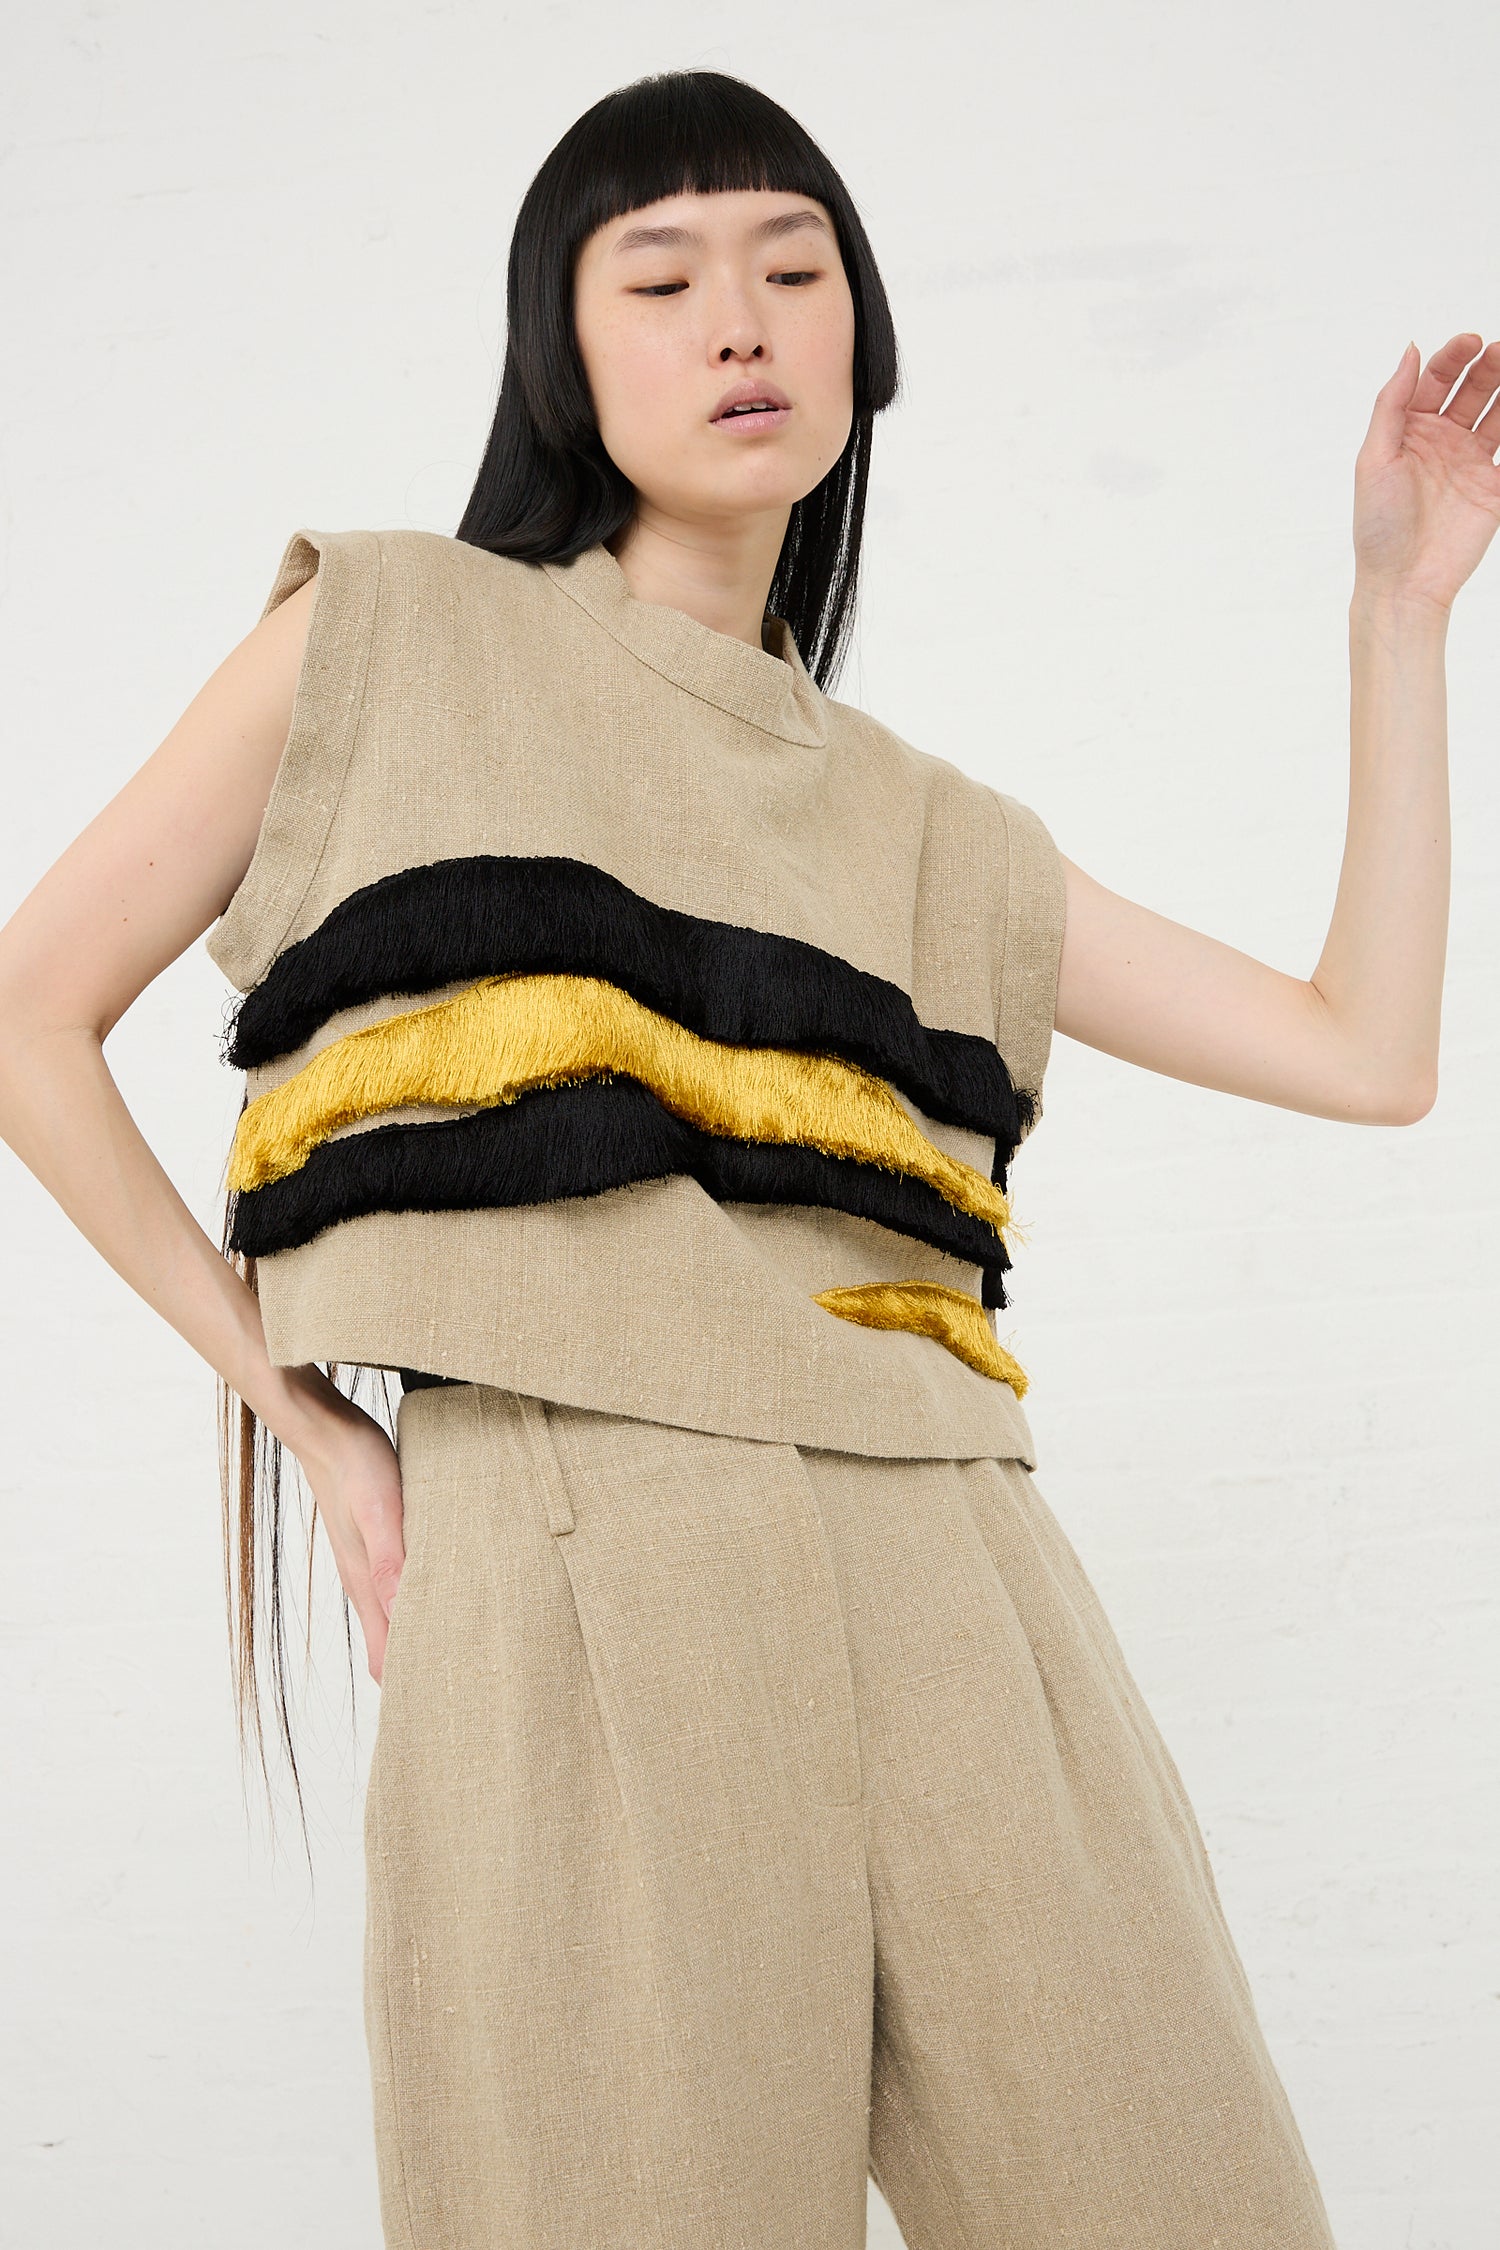 Woman modeling a Rachel Comey Bacchus Top in Natural, a beige sleeveless crop top with black and yellow horizontal stripes, paired with matching trousers, against a white background.